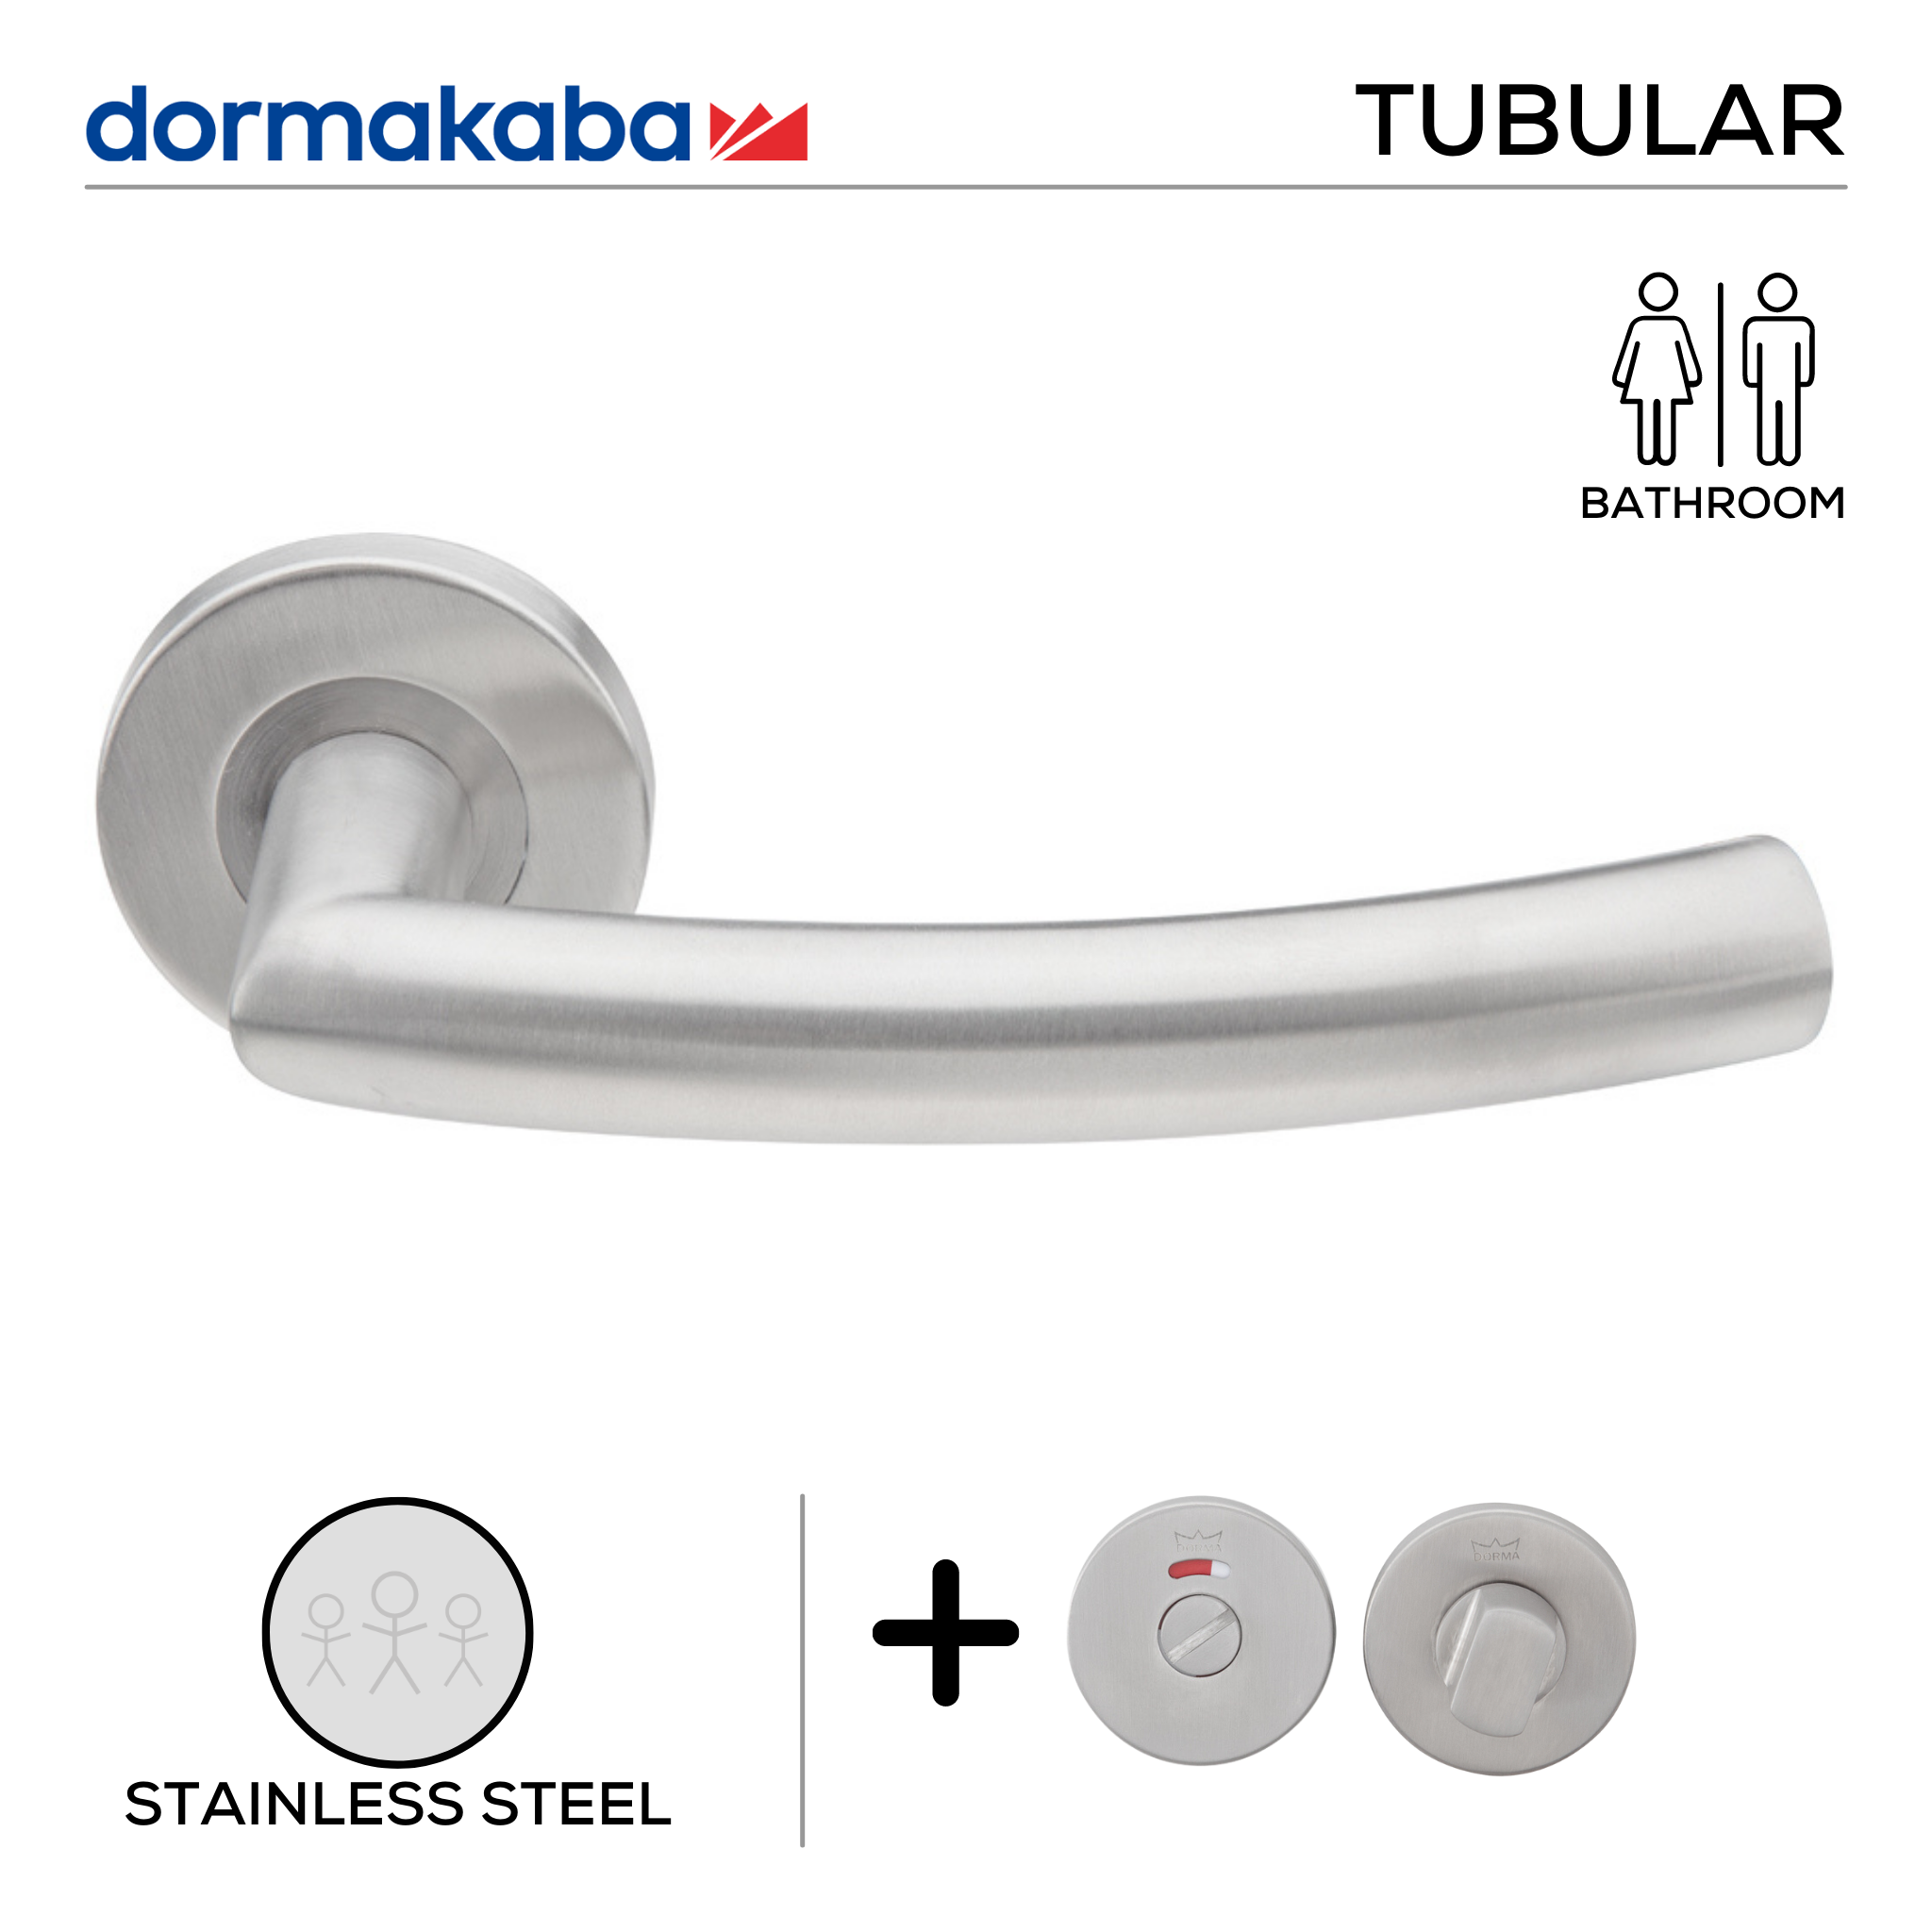 TH 128 Bathroom W/C, Lever Handles, Tubular, On Round Rose, With Bathroom (WC) Indicator Set - DWC 005, 152mm (l), Stainless Steel, DORMAKABA